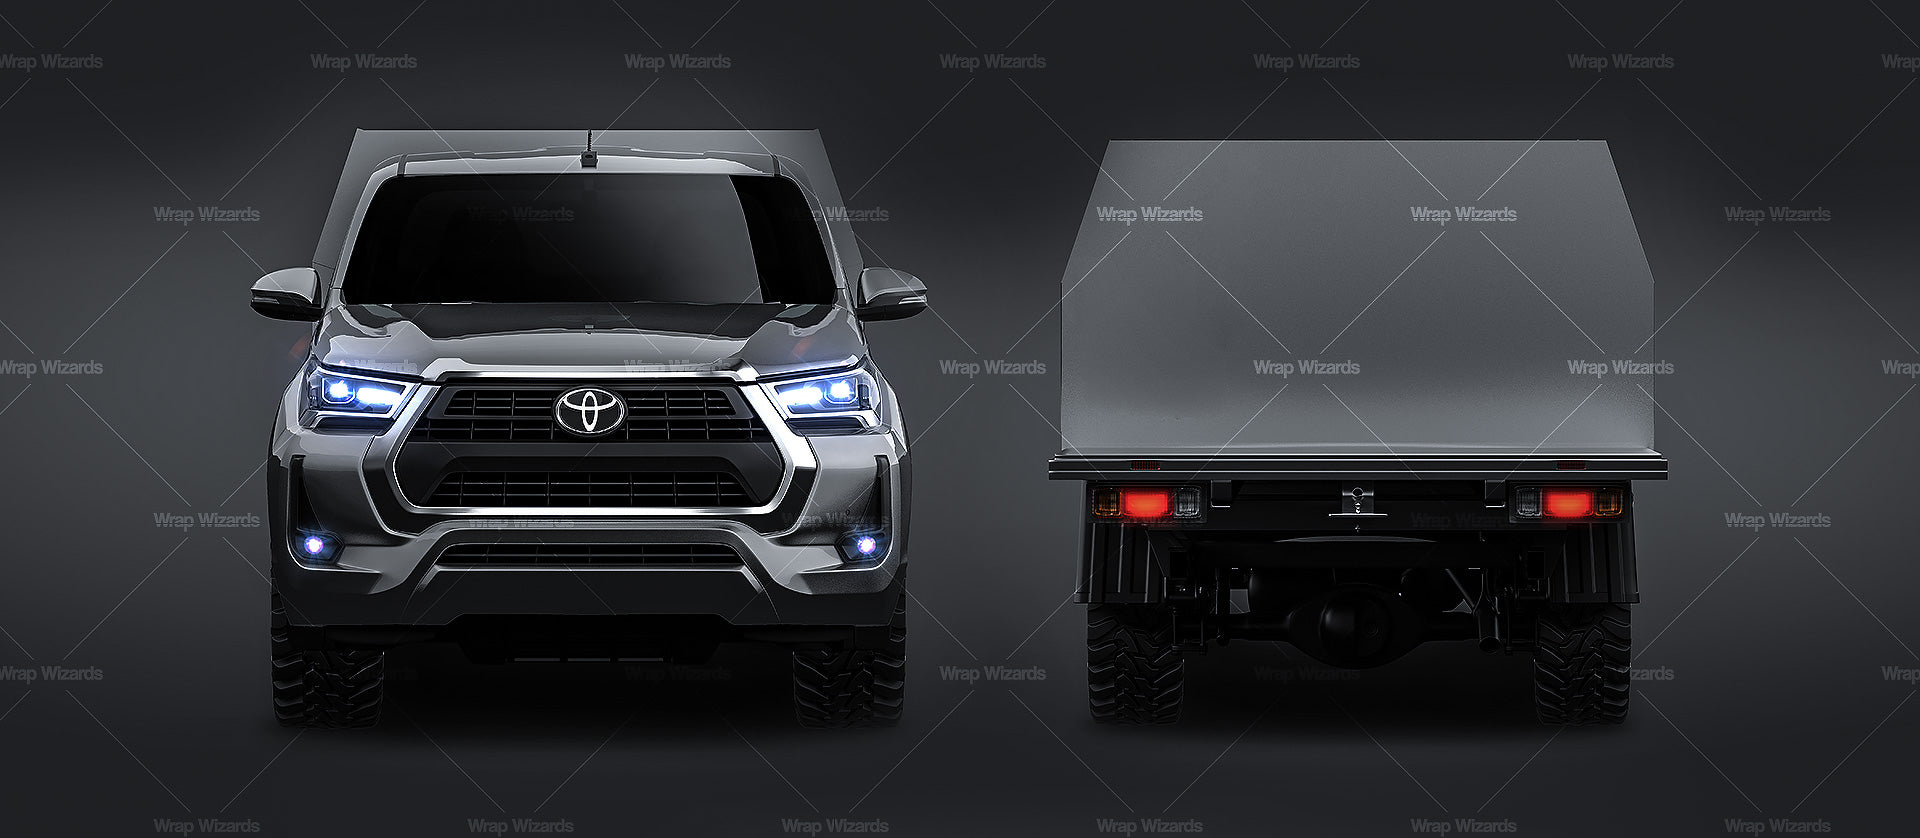 Toyota Hilux 2021 Double Cab Alloy Tray with UTE toolbox - Truck/Pick-up Mockup